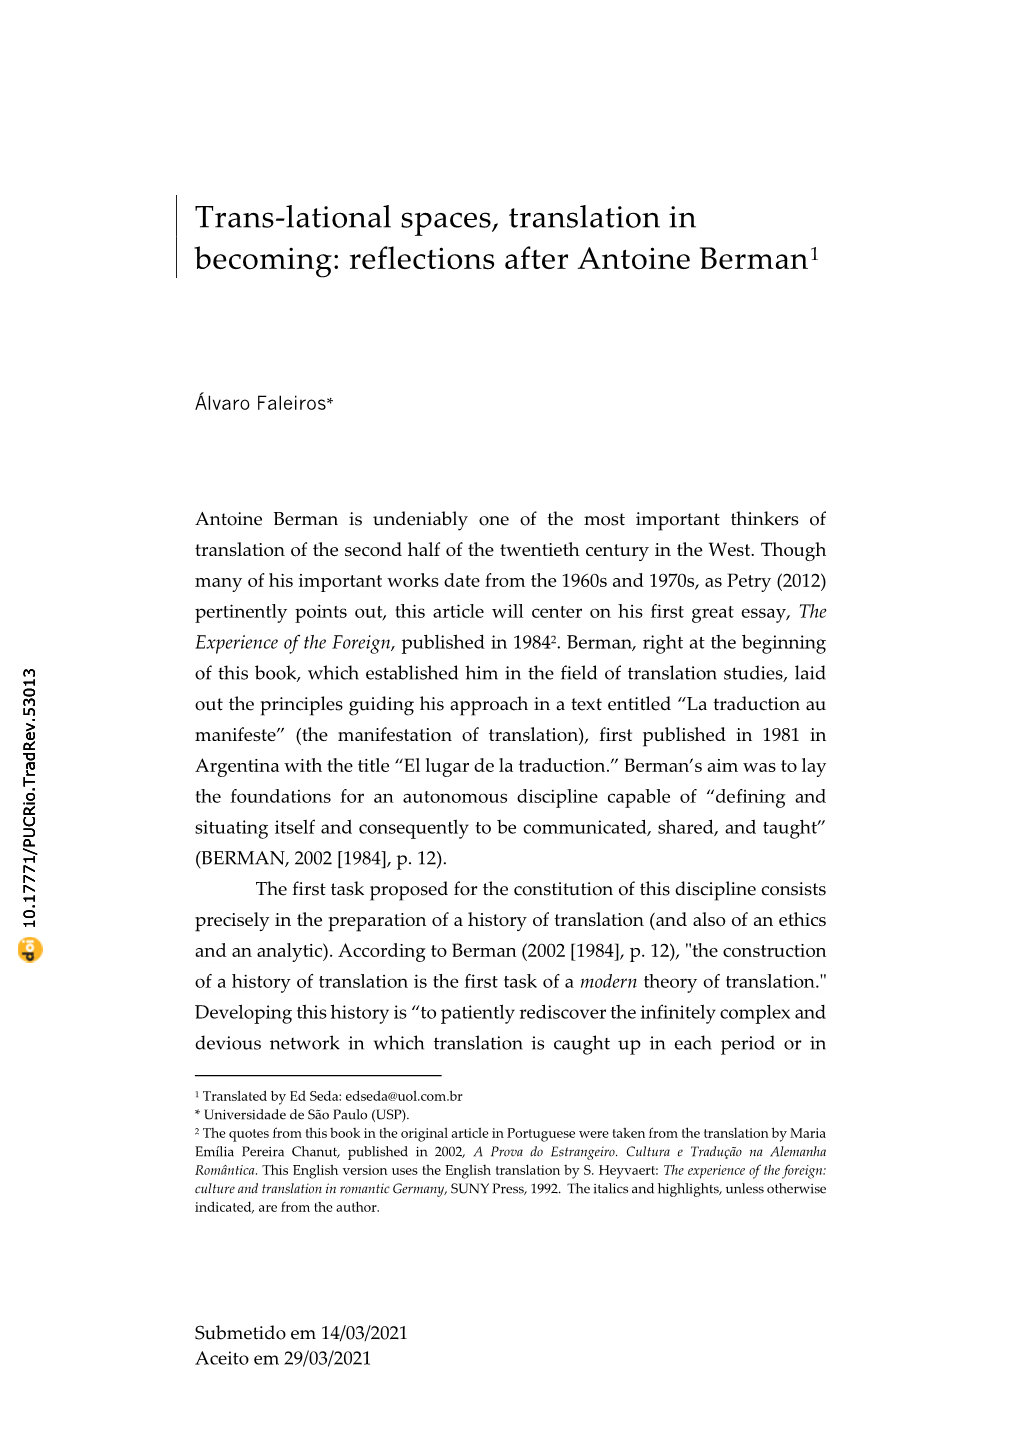 Trans-Lational Spaces, Translation in Becoming: Reflections After Antoine Berman1